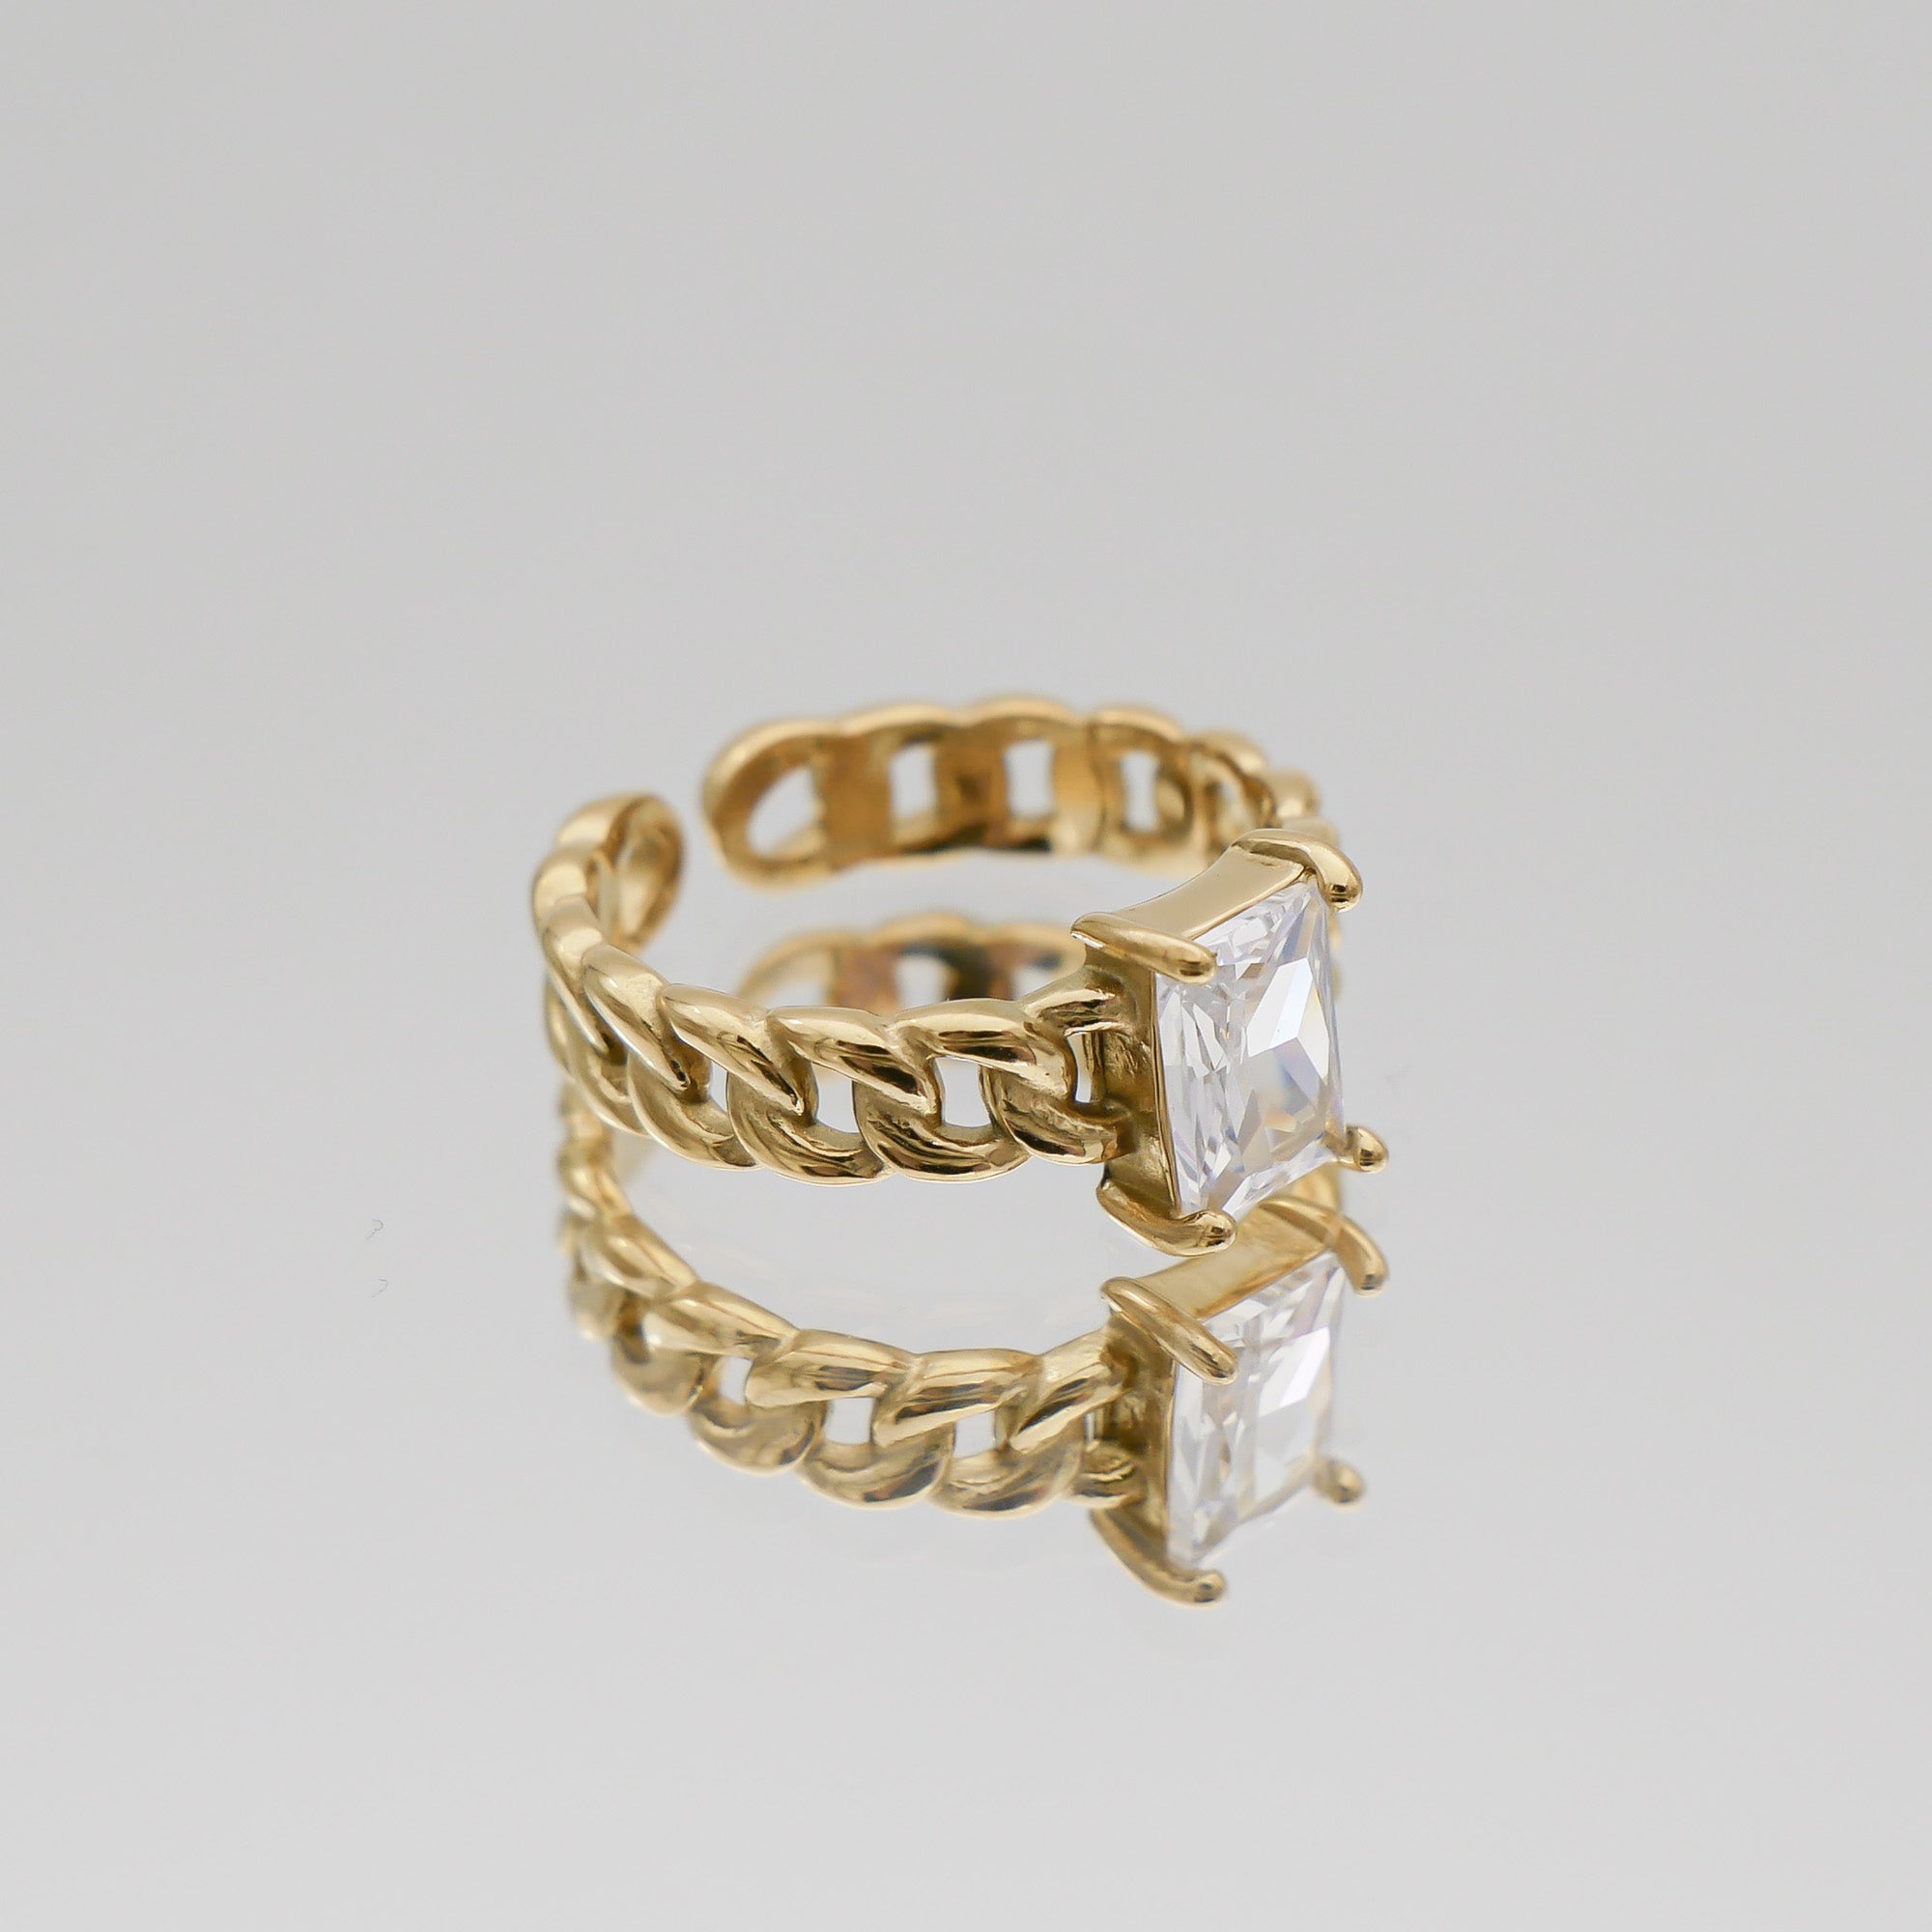 Laria Cuban Ring in clear cubic zirconia